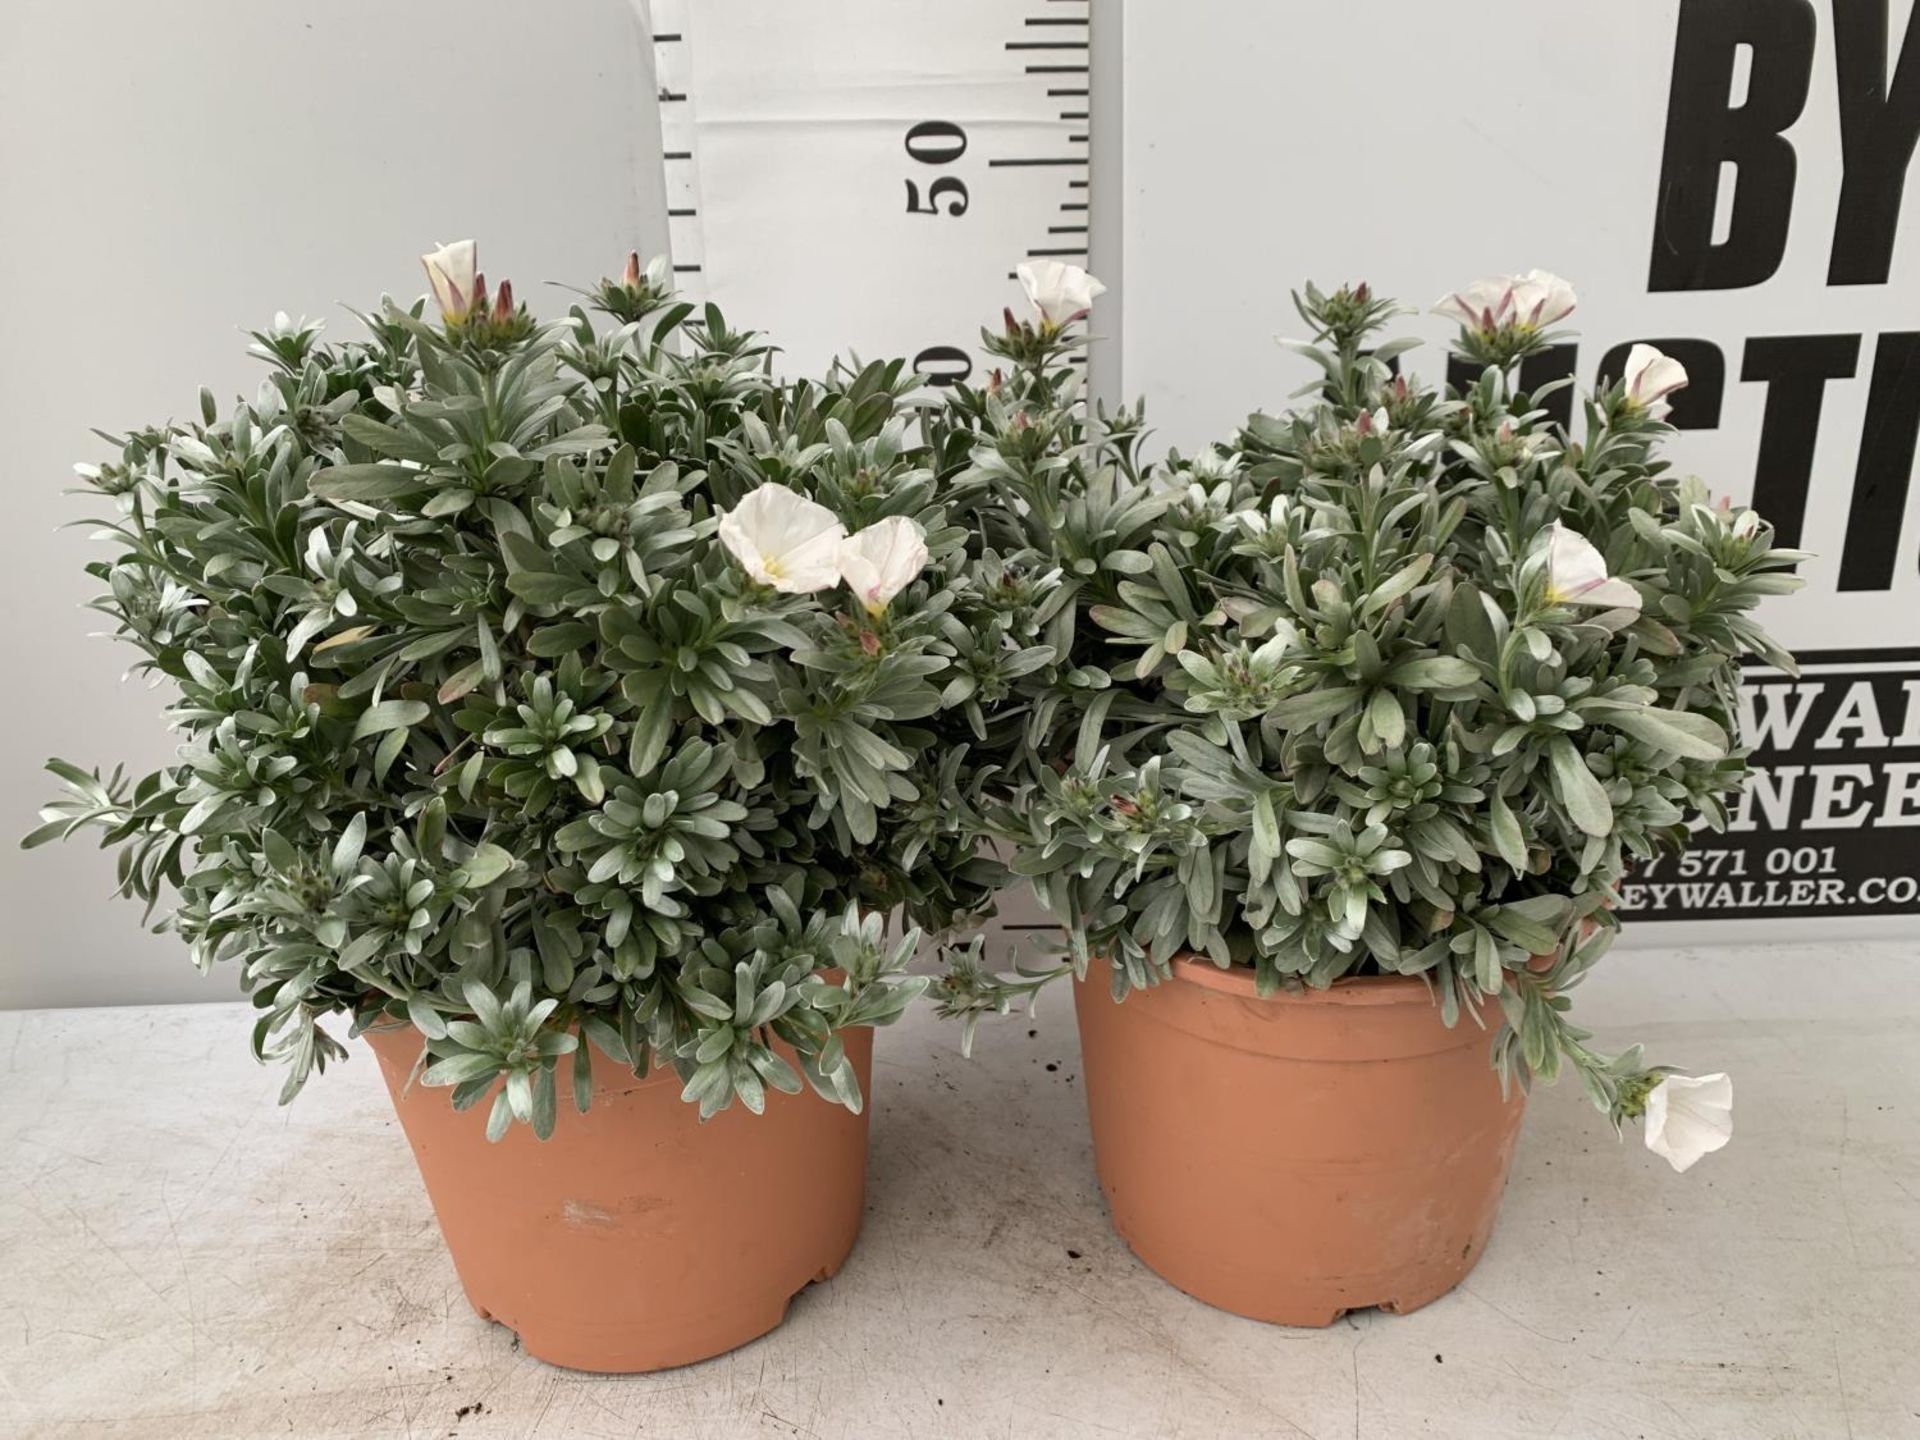 TWO CONVOLVULUS CNEORUM WITH WHITE FLOWERS IN 5 LTR POTS APPROX 45CM IN HEIGHT PLUS VAT TO BE SOLD